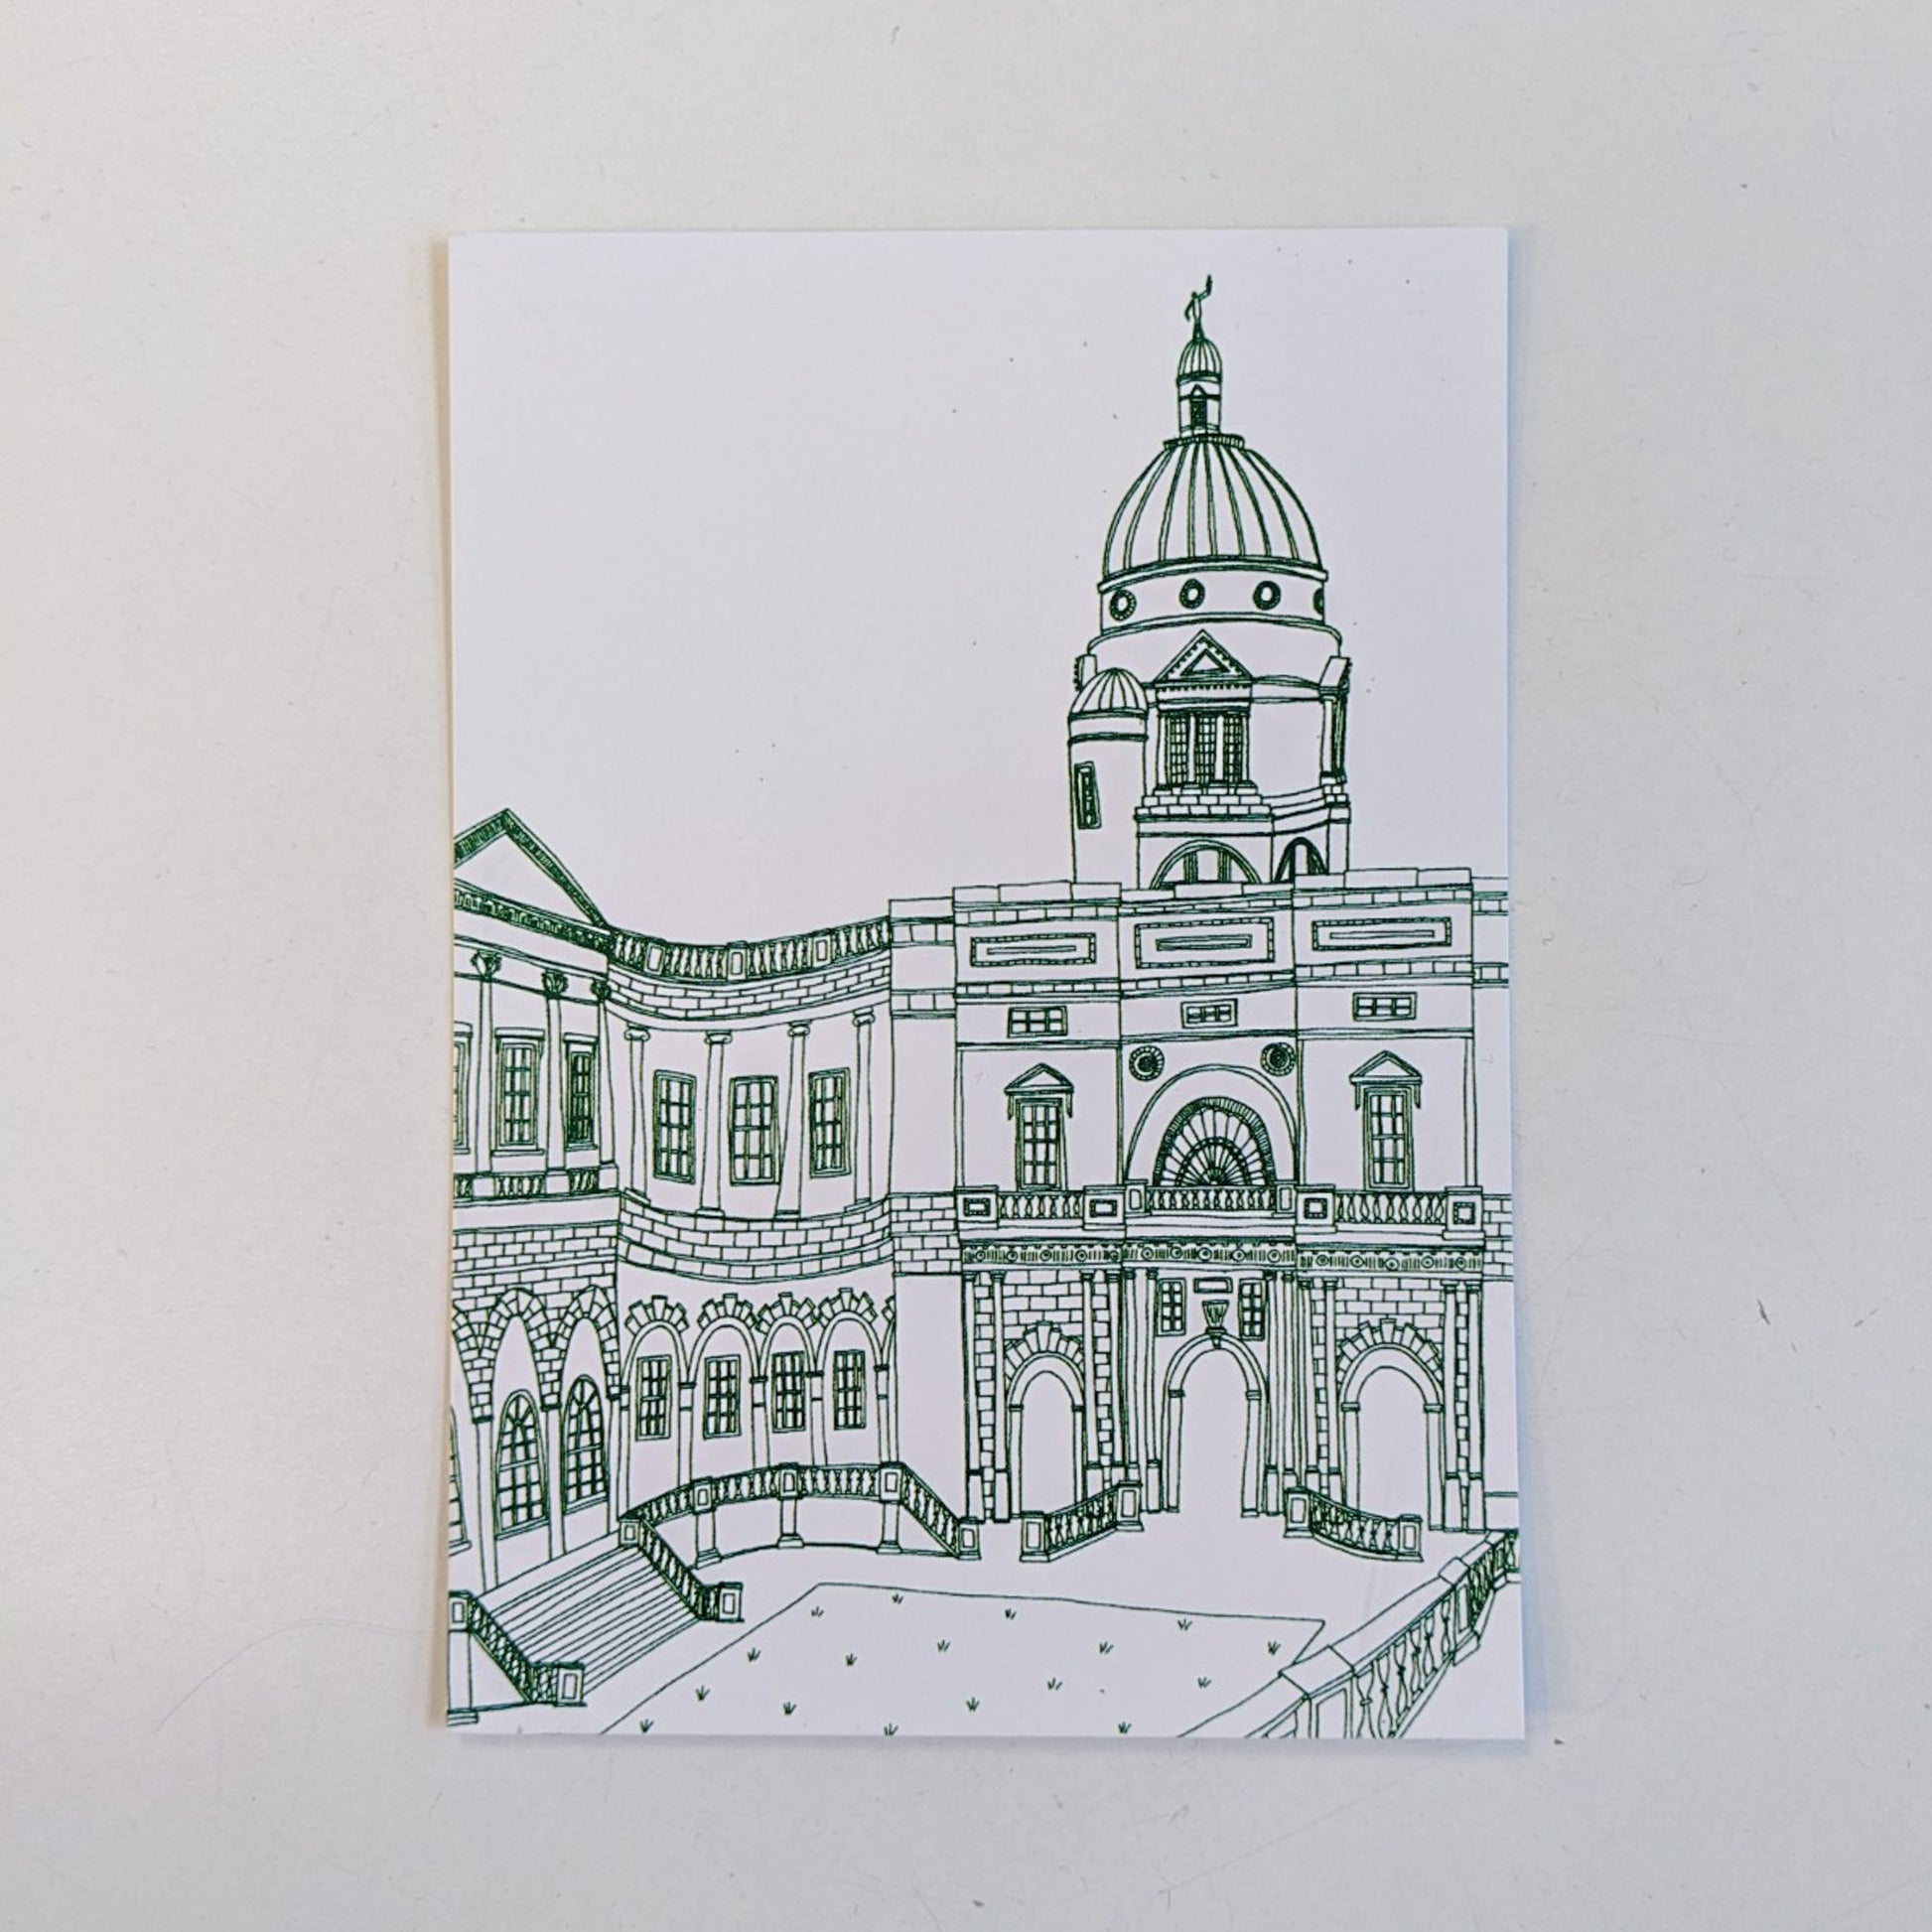 Illustrated image of Old College on a postcard by Victoria Rose Ball. The lines are a dark green, set on a white background. The postcard itself is also set on a white background.